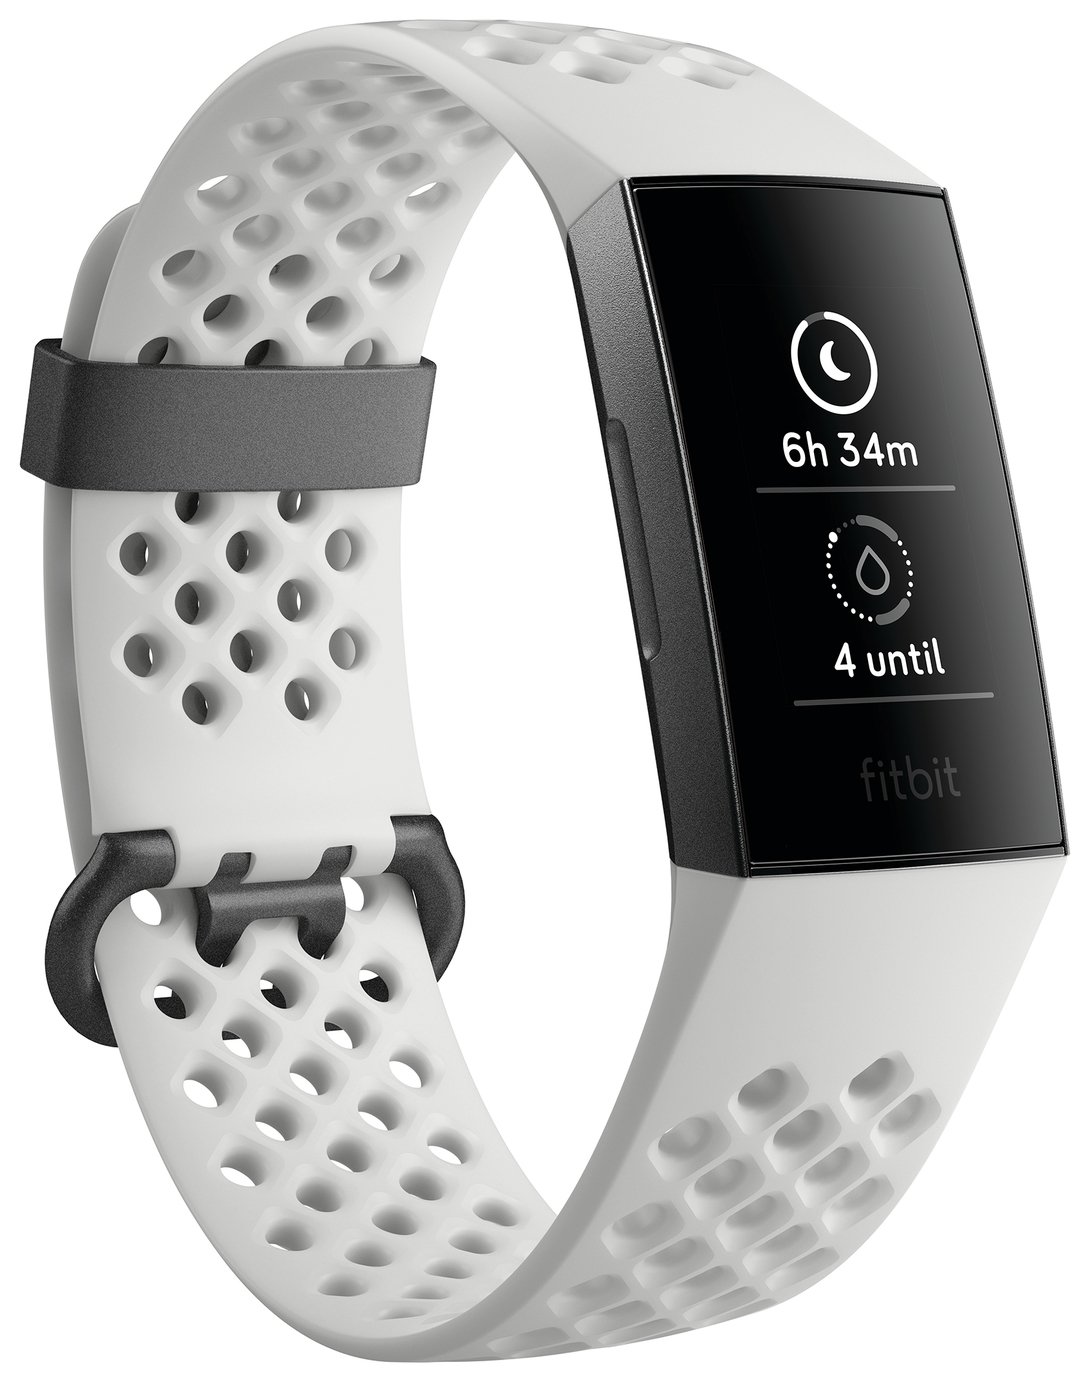 Fitbit Charge 3 Special Edition Smart Watch - Graphite White